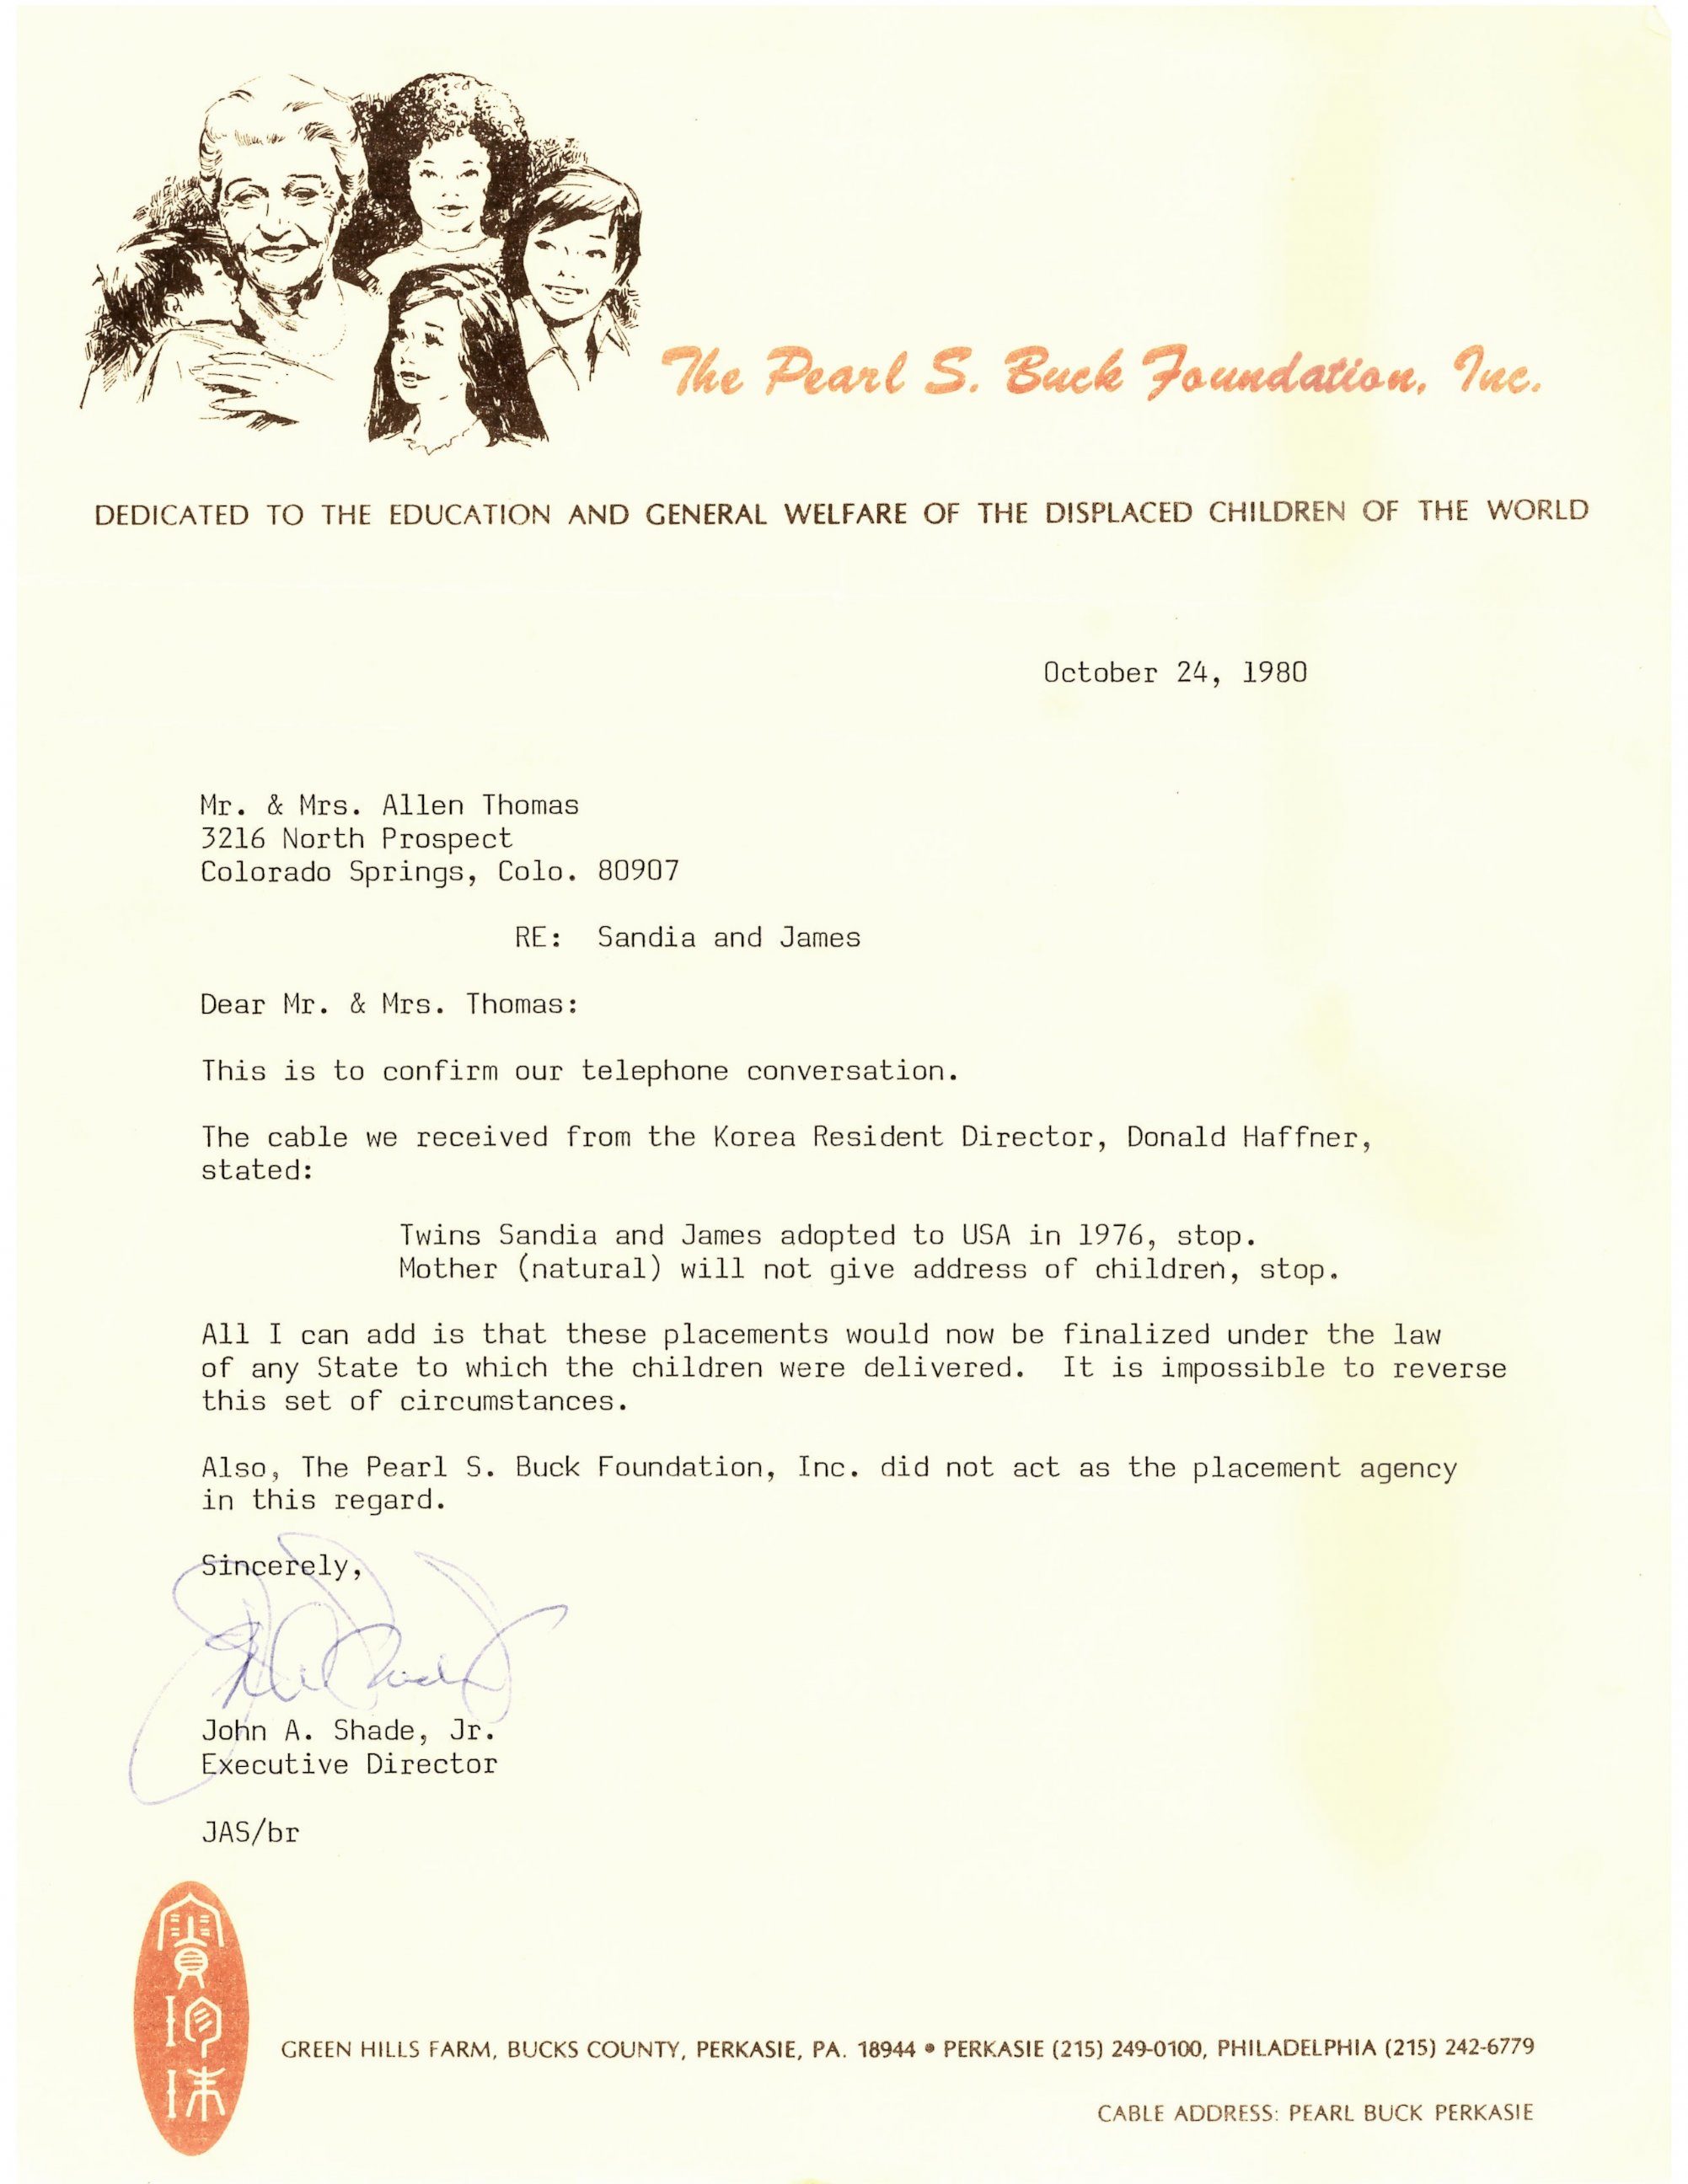 PHOTO: Allen Thomas received this letter from the Pearl S. Buck Foundation, which confirmed that Thomas' his twins were adopted into the United States in 1976.